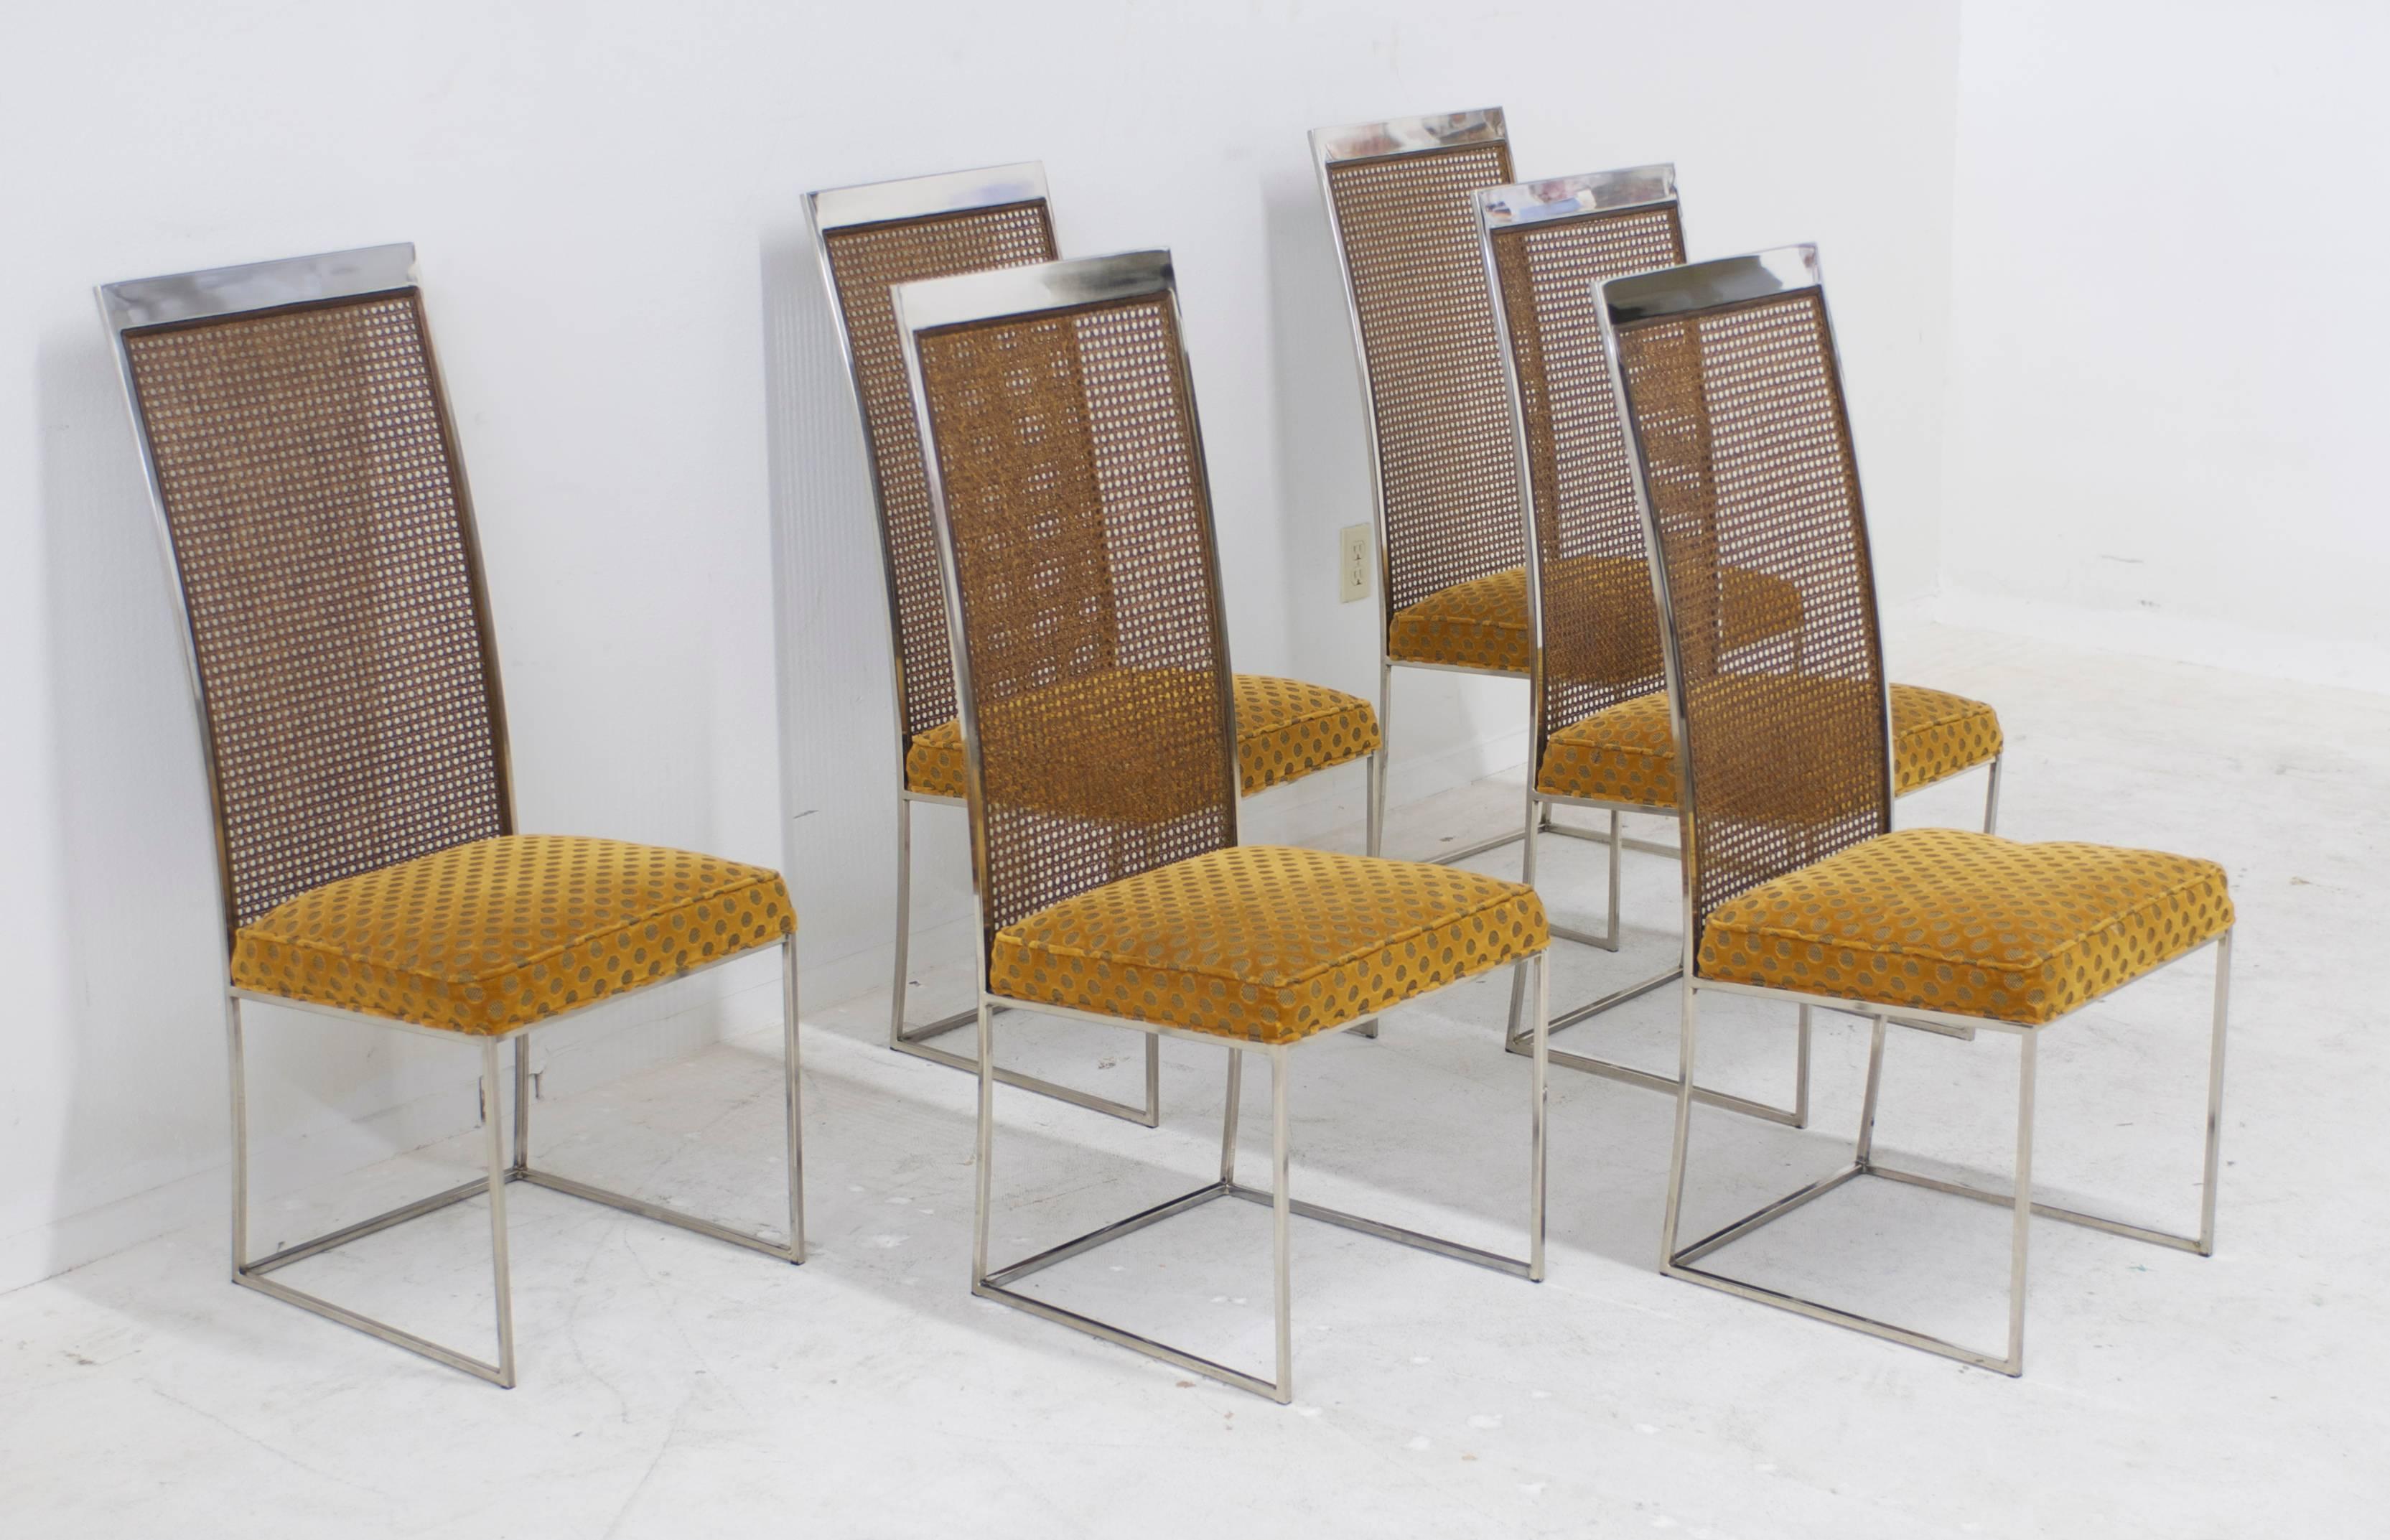 A set of six Milo Baughman for Thayer Coggin dining chairs, circa 1970s. The caning is in excellent vintage condition. The vintage mustard colored raised velvet fabric has a geometric pattern that cheerfully plays against the caning. It has been